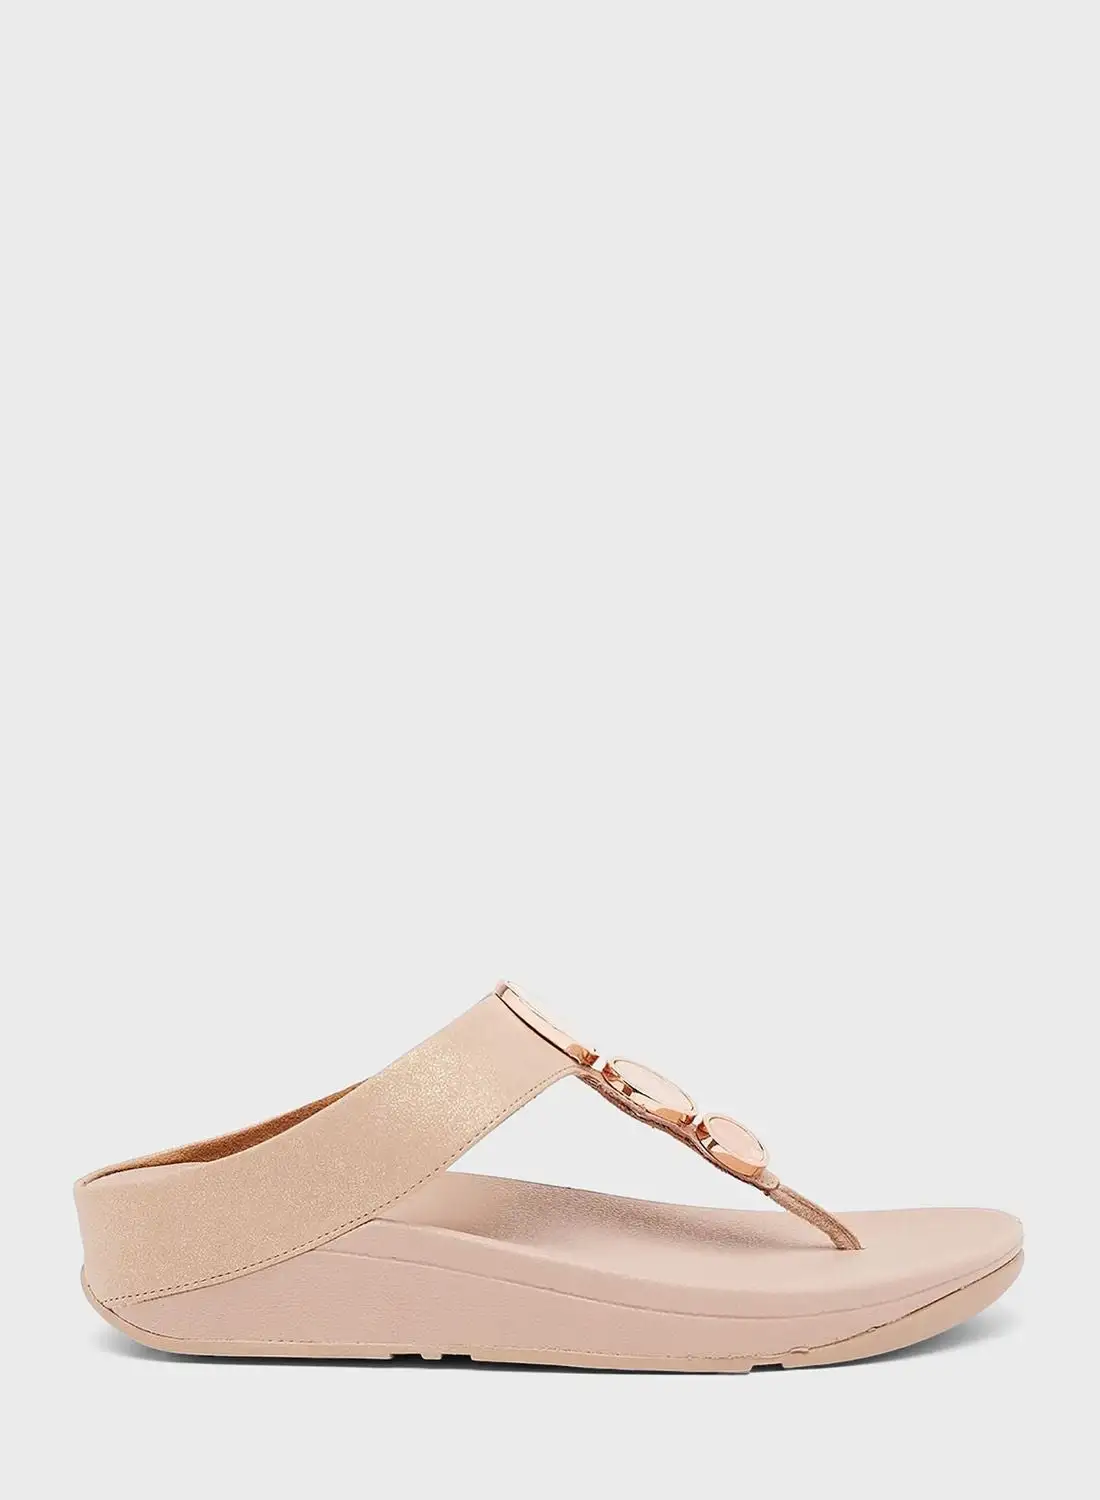 fitflop Halo Shimmer Toe-Post Sandals